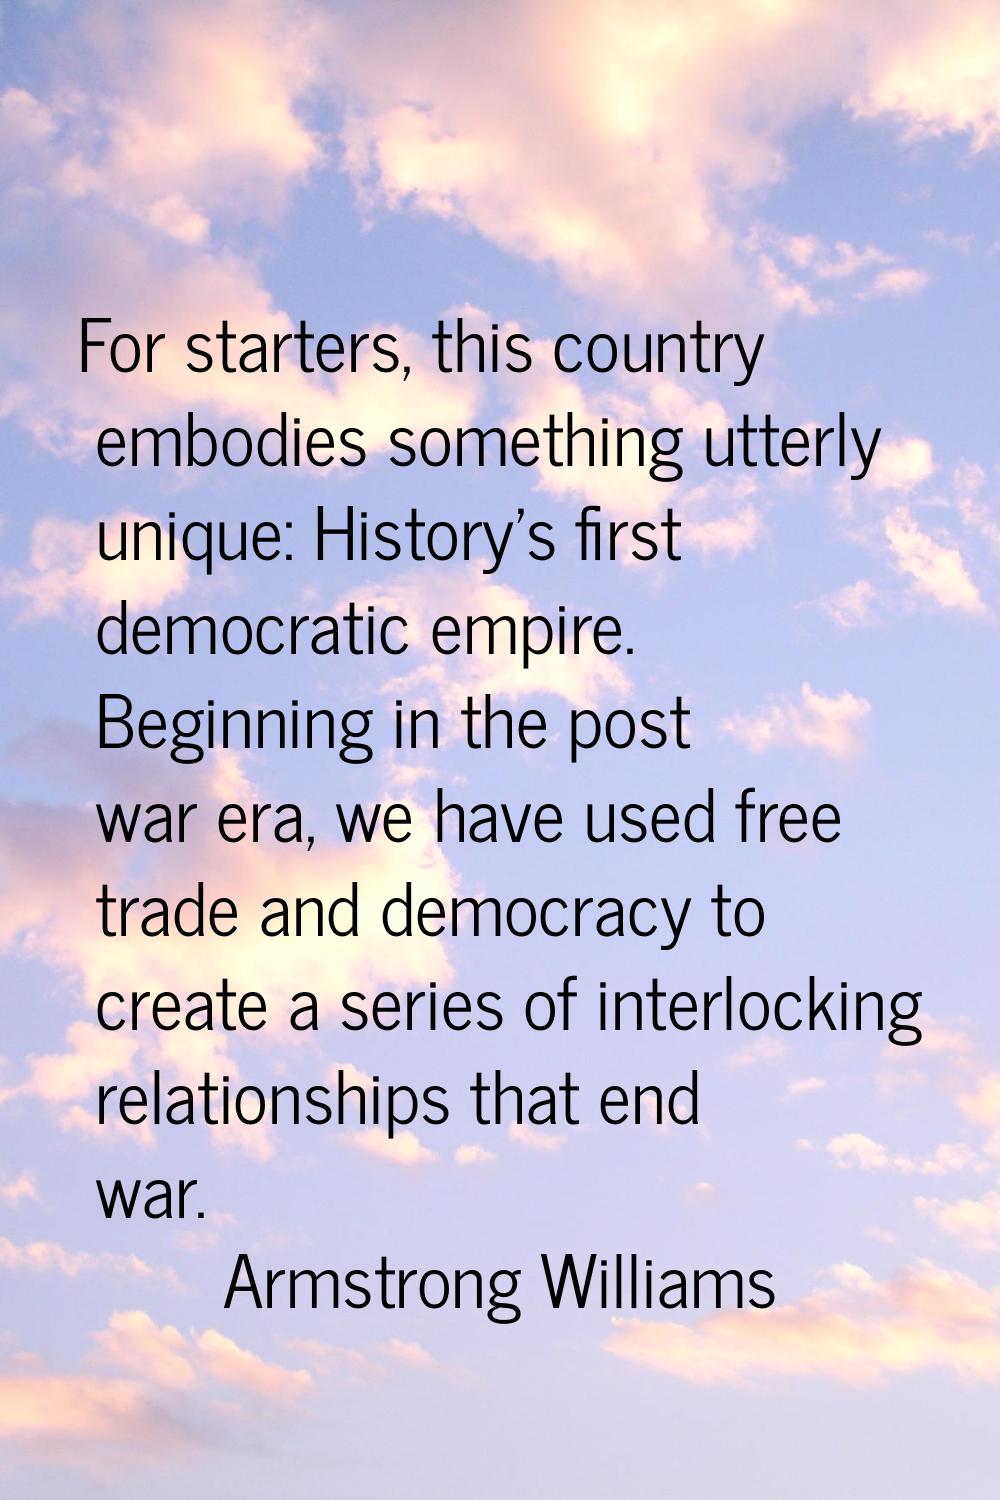 For starters, this country embodies something utterly unique: History's first democratic empire. Be